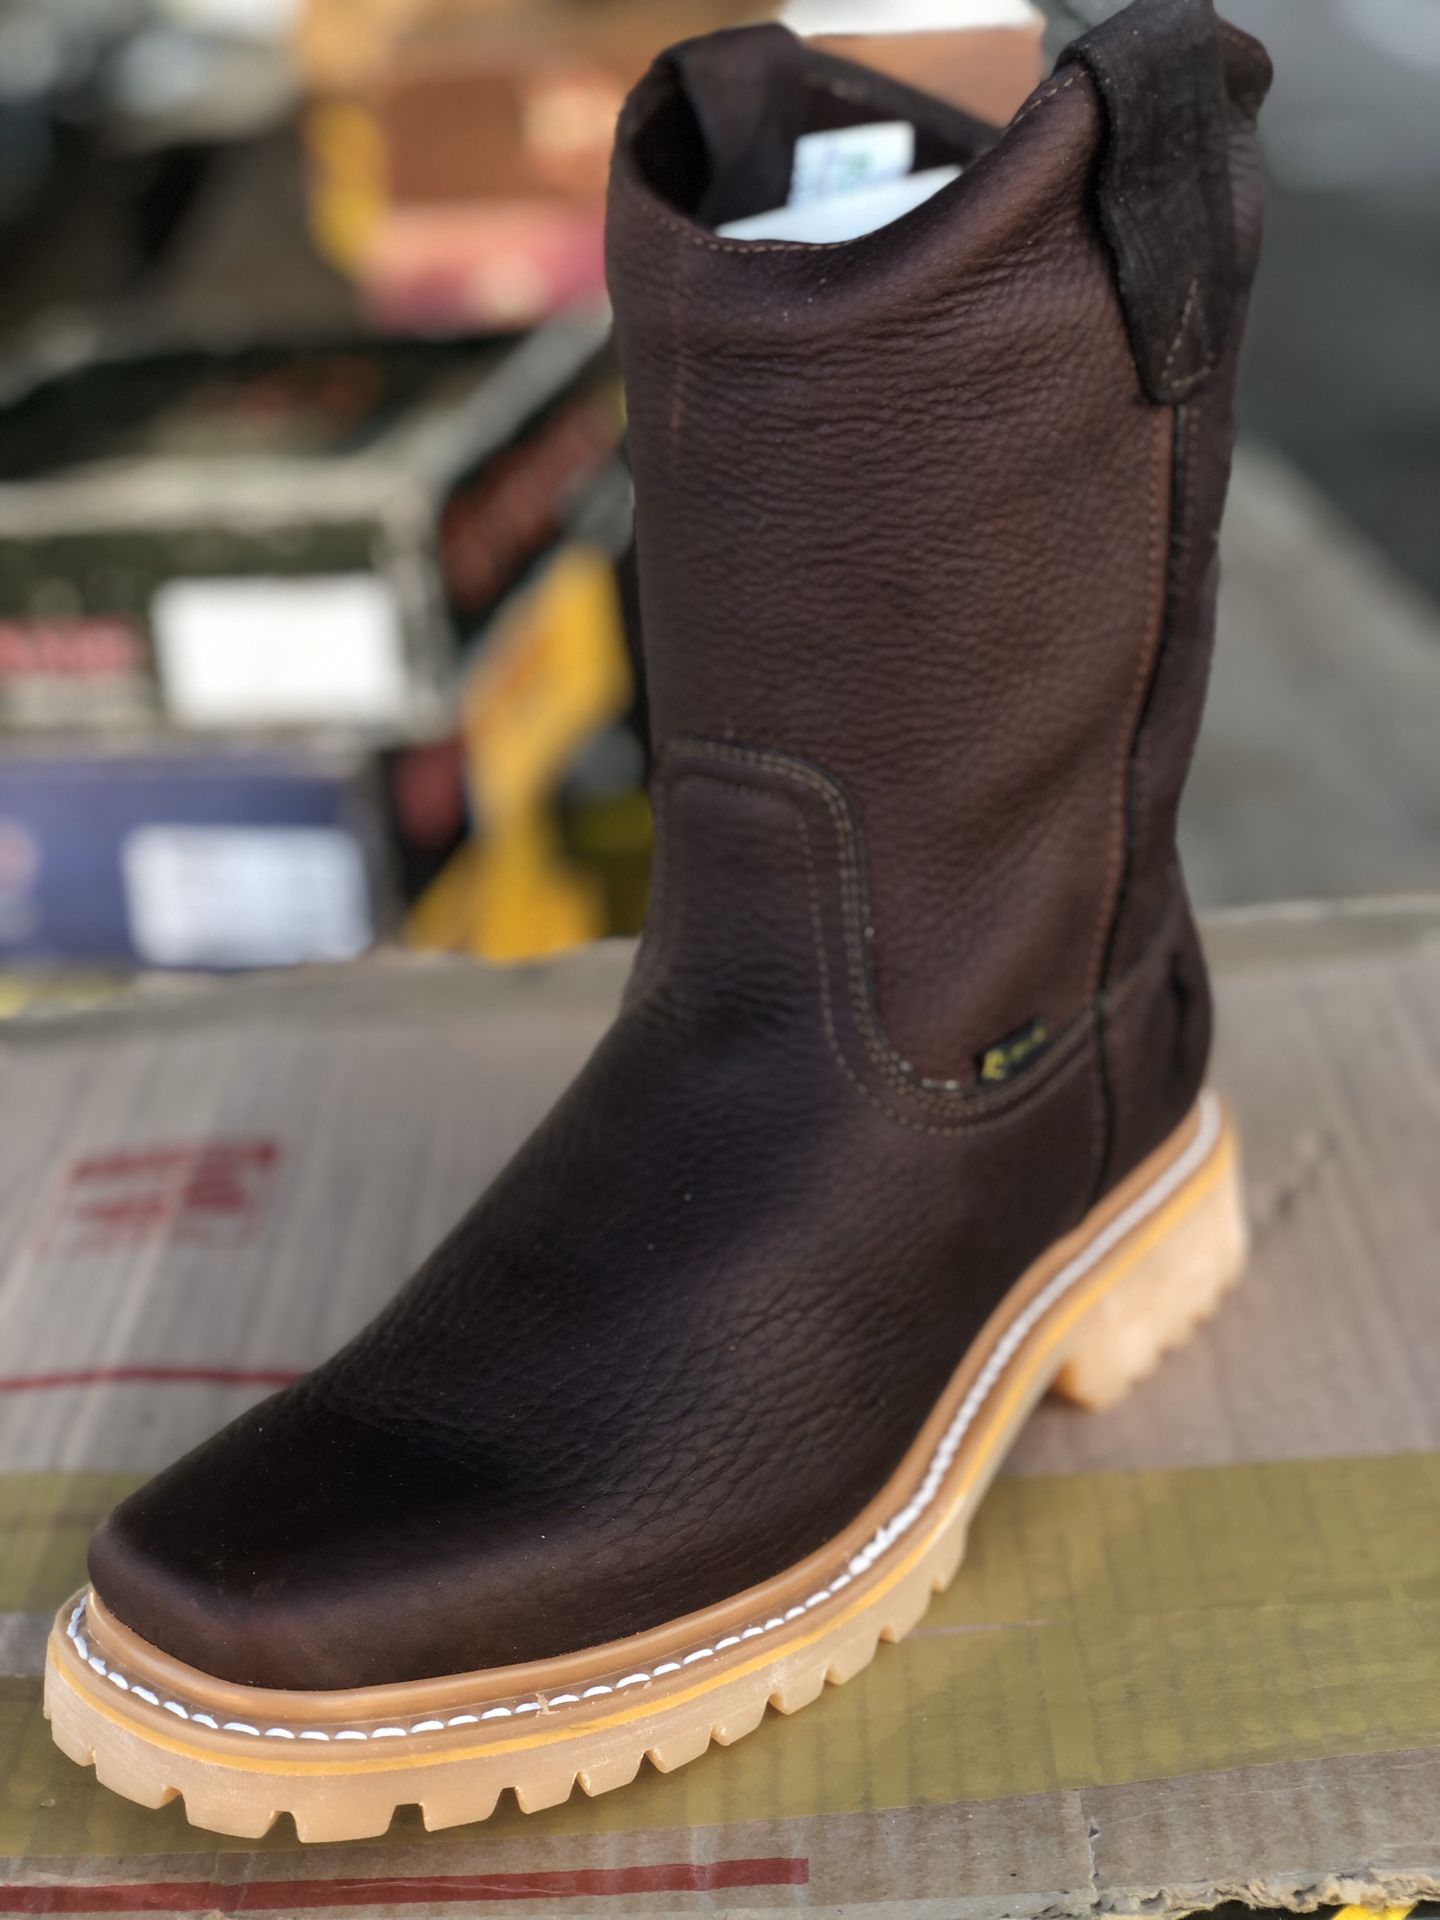 Squared toe work boot